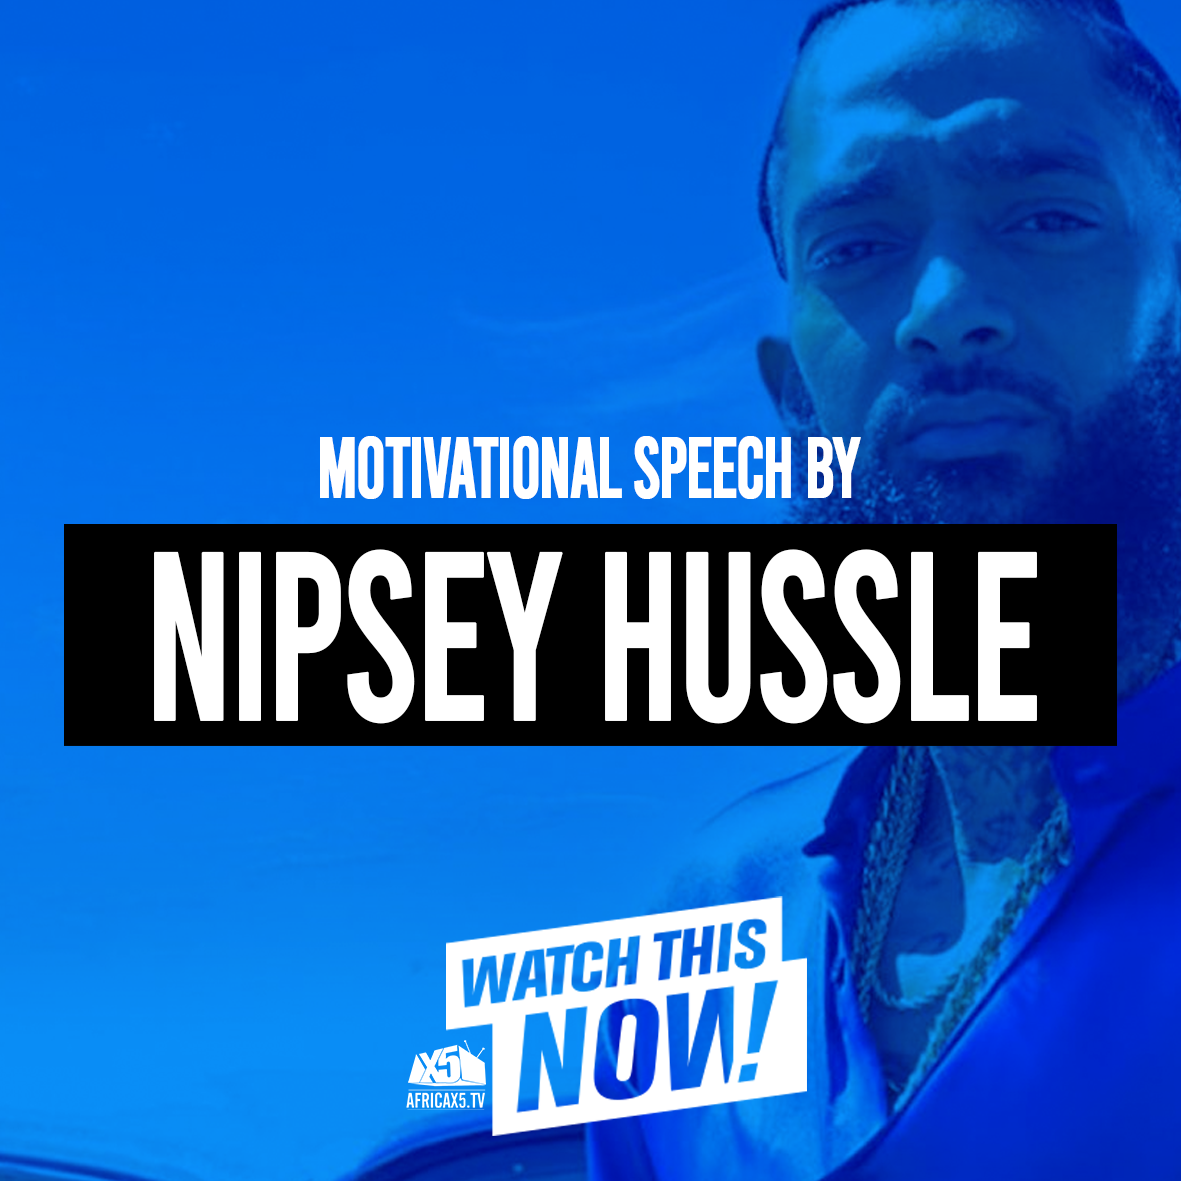 ONE OF THE MOST EYE OPENING SPEECHES | Nipsey Hussle